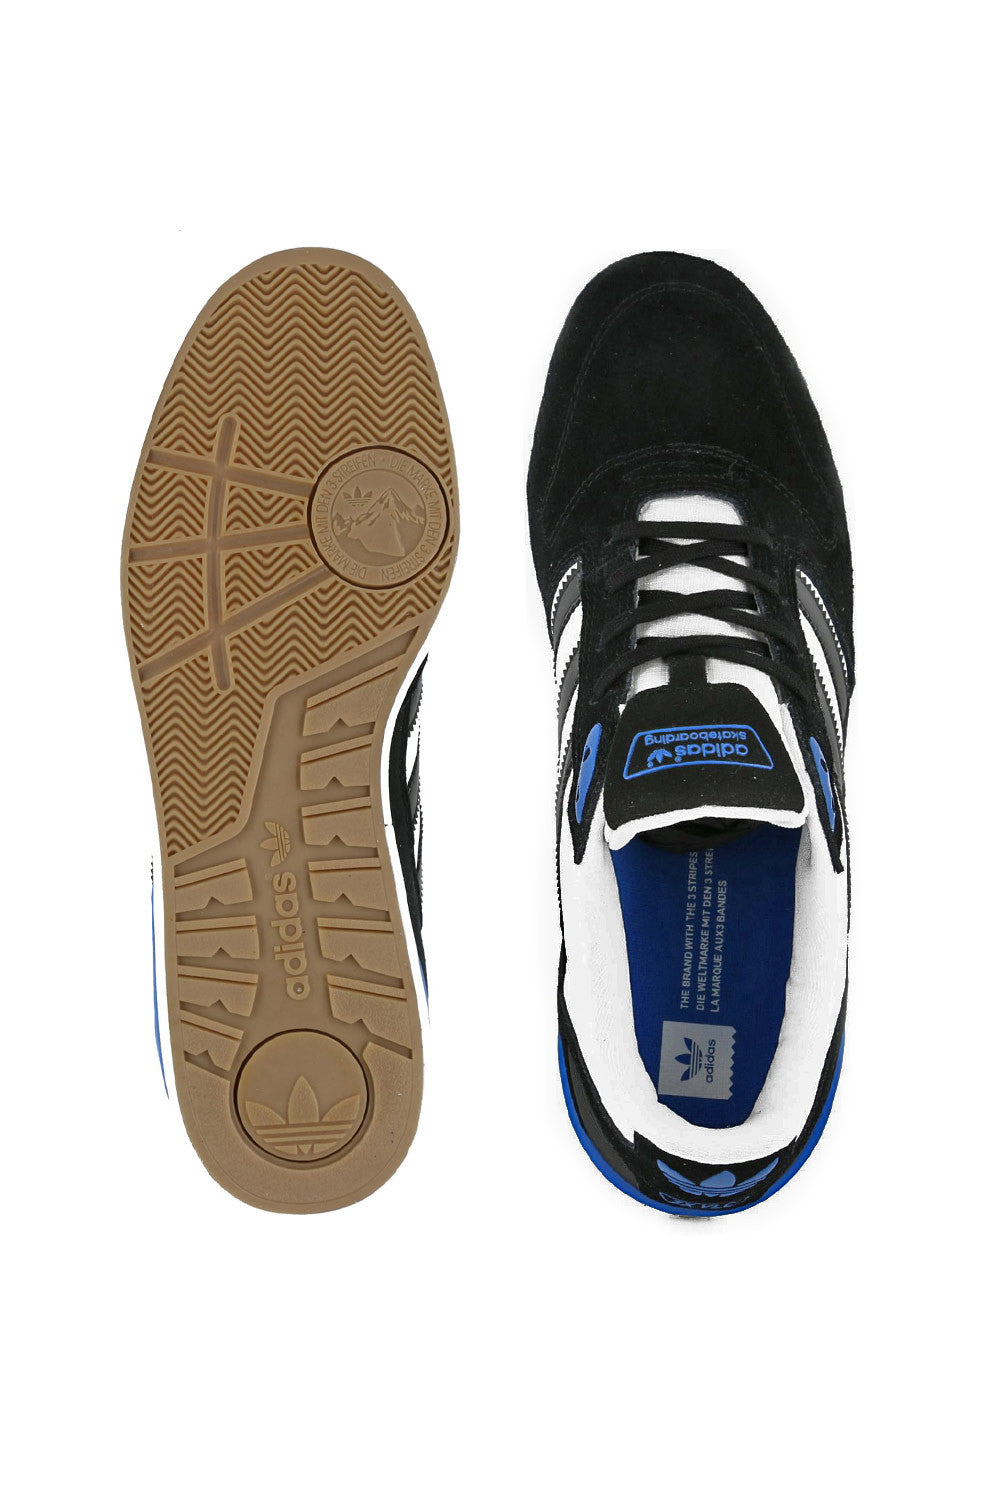 adidas zx skate shoes